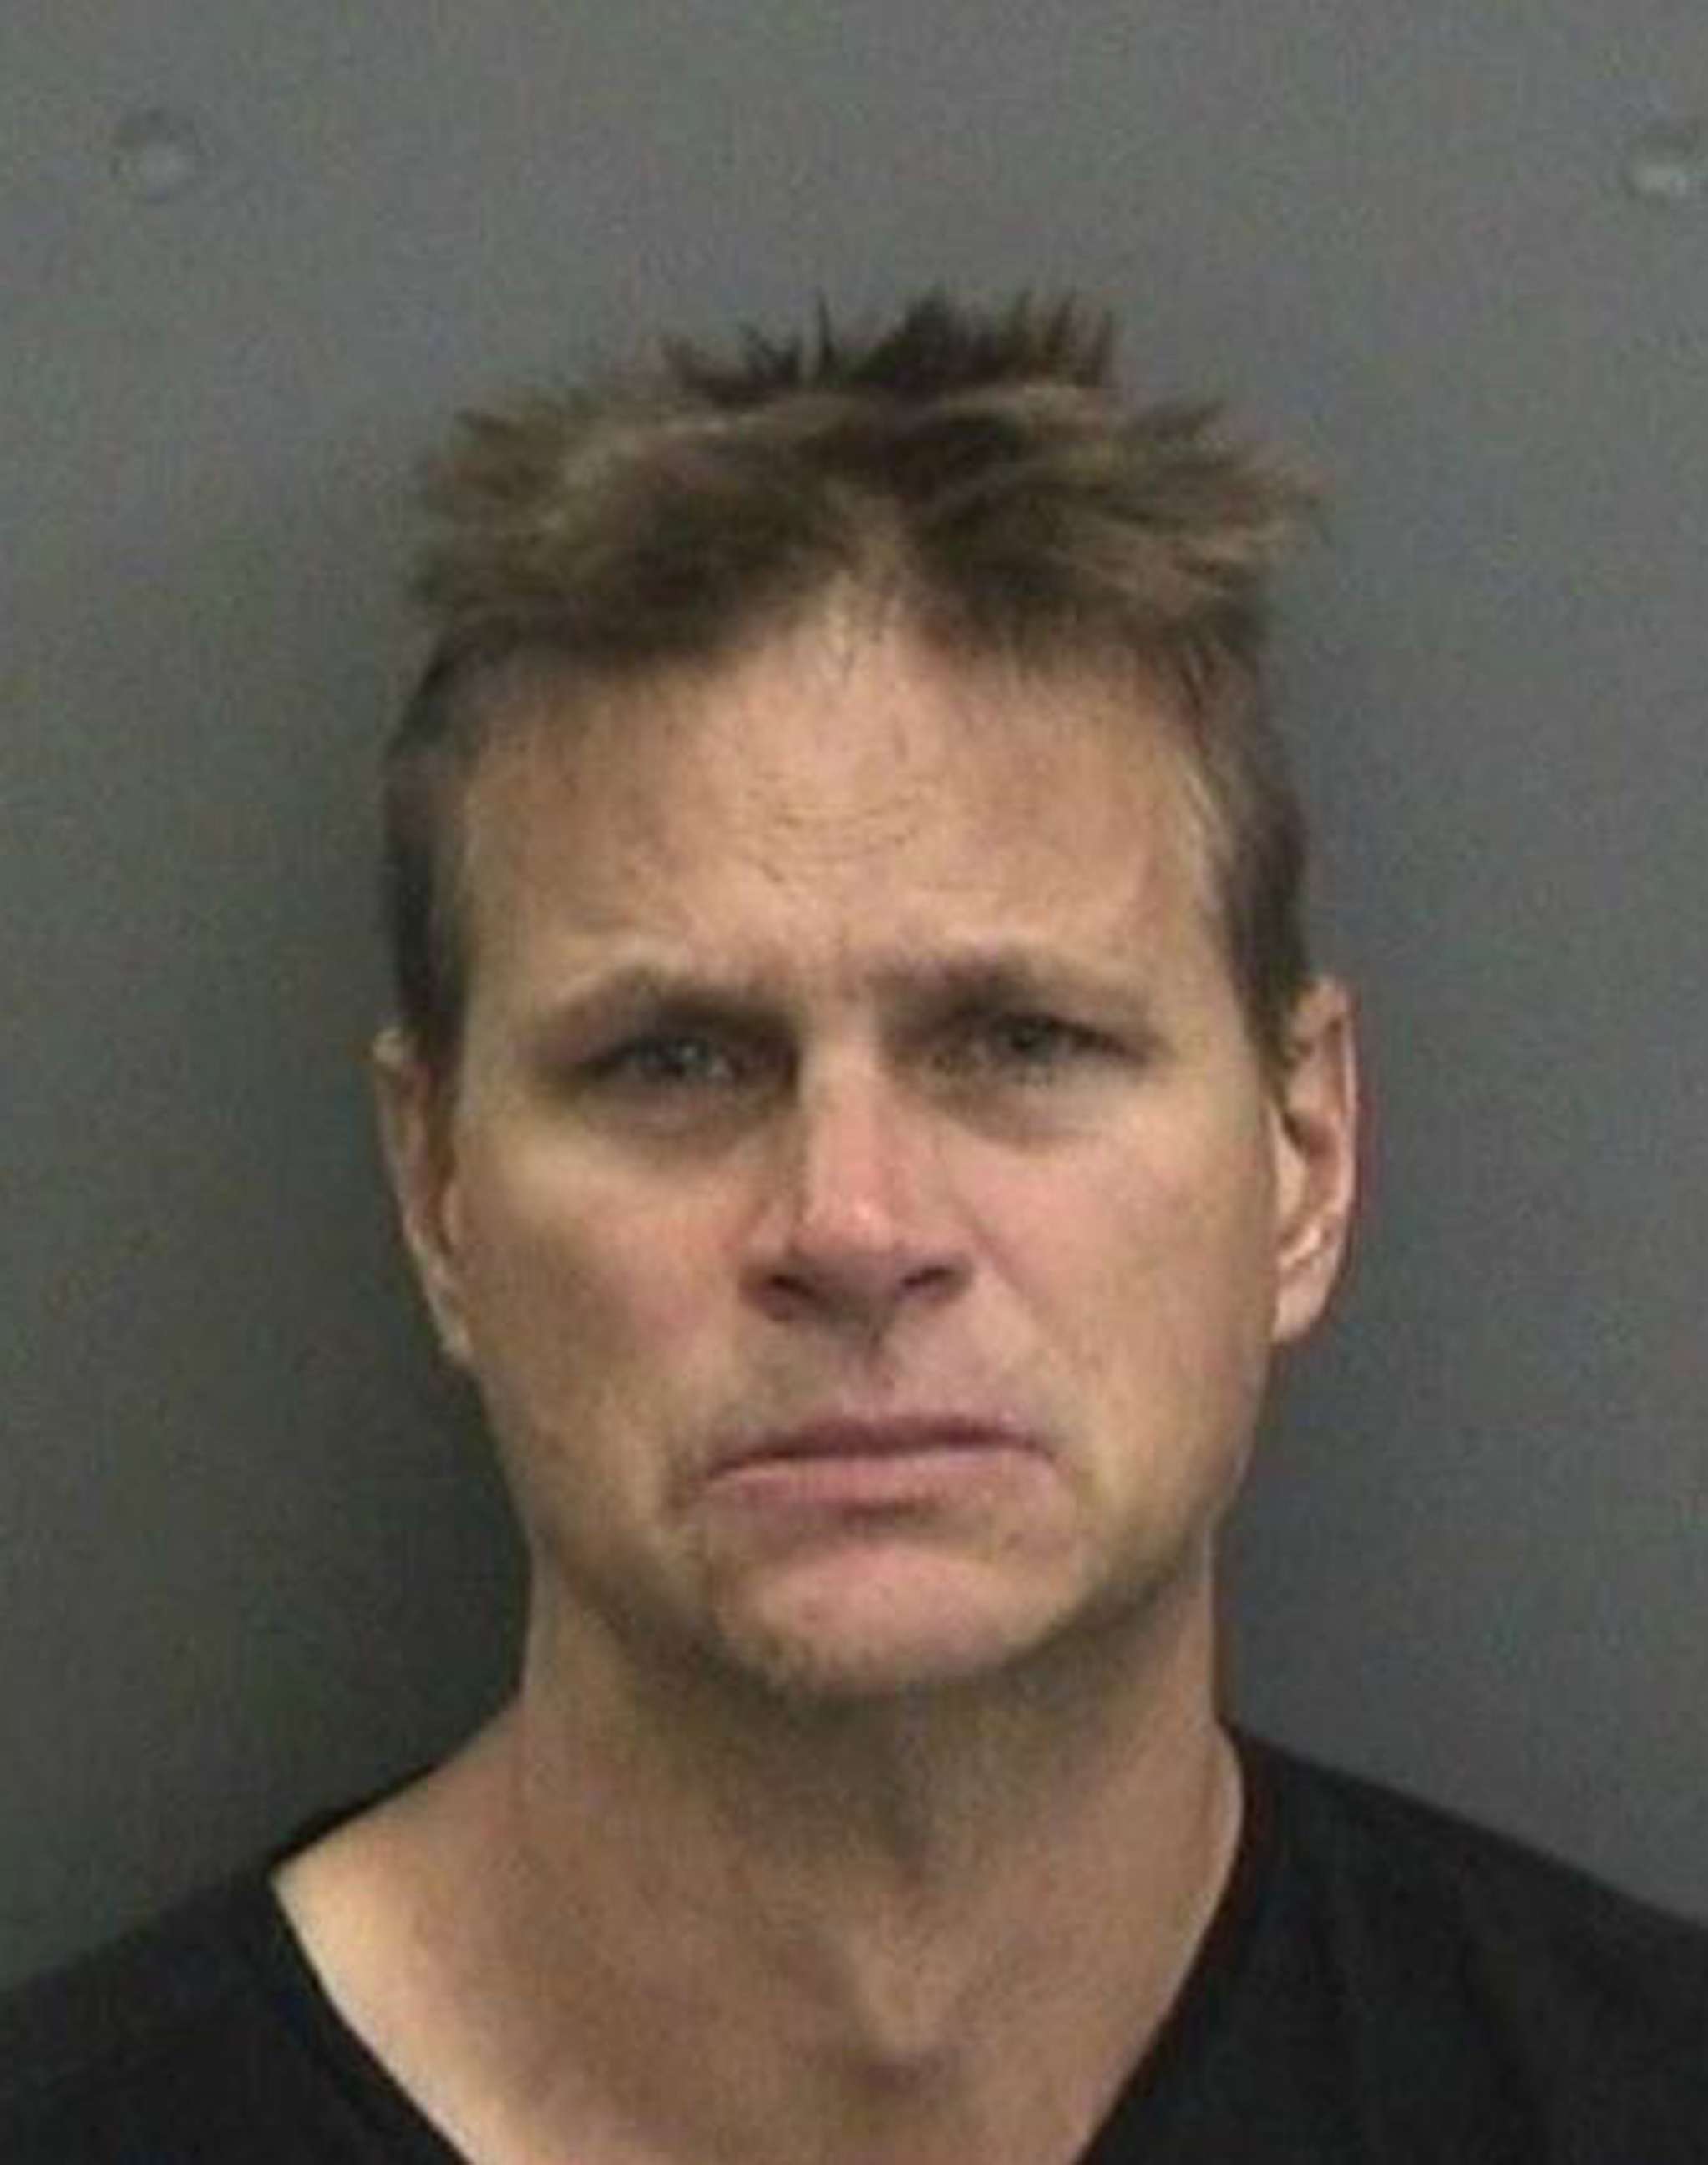 PHOTO: Todd Barket, 51, of Brandon, Florida, was arrested for first-degree murder, March 27, 2019.